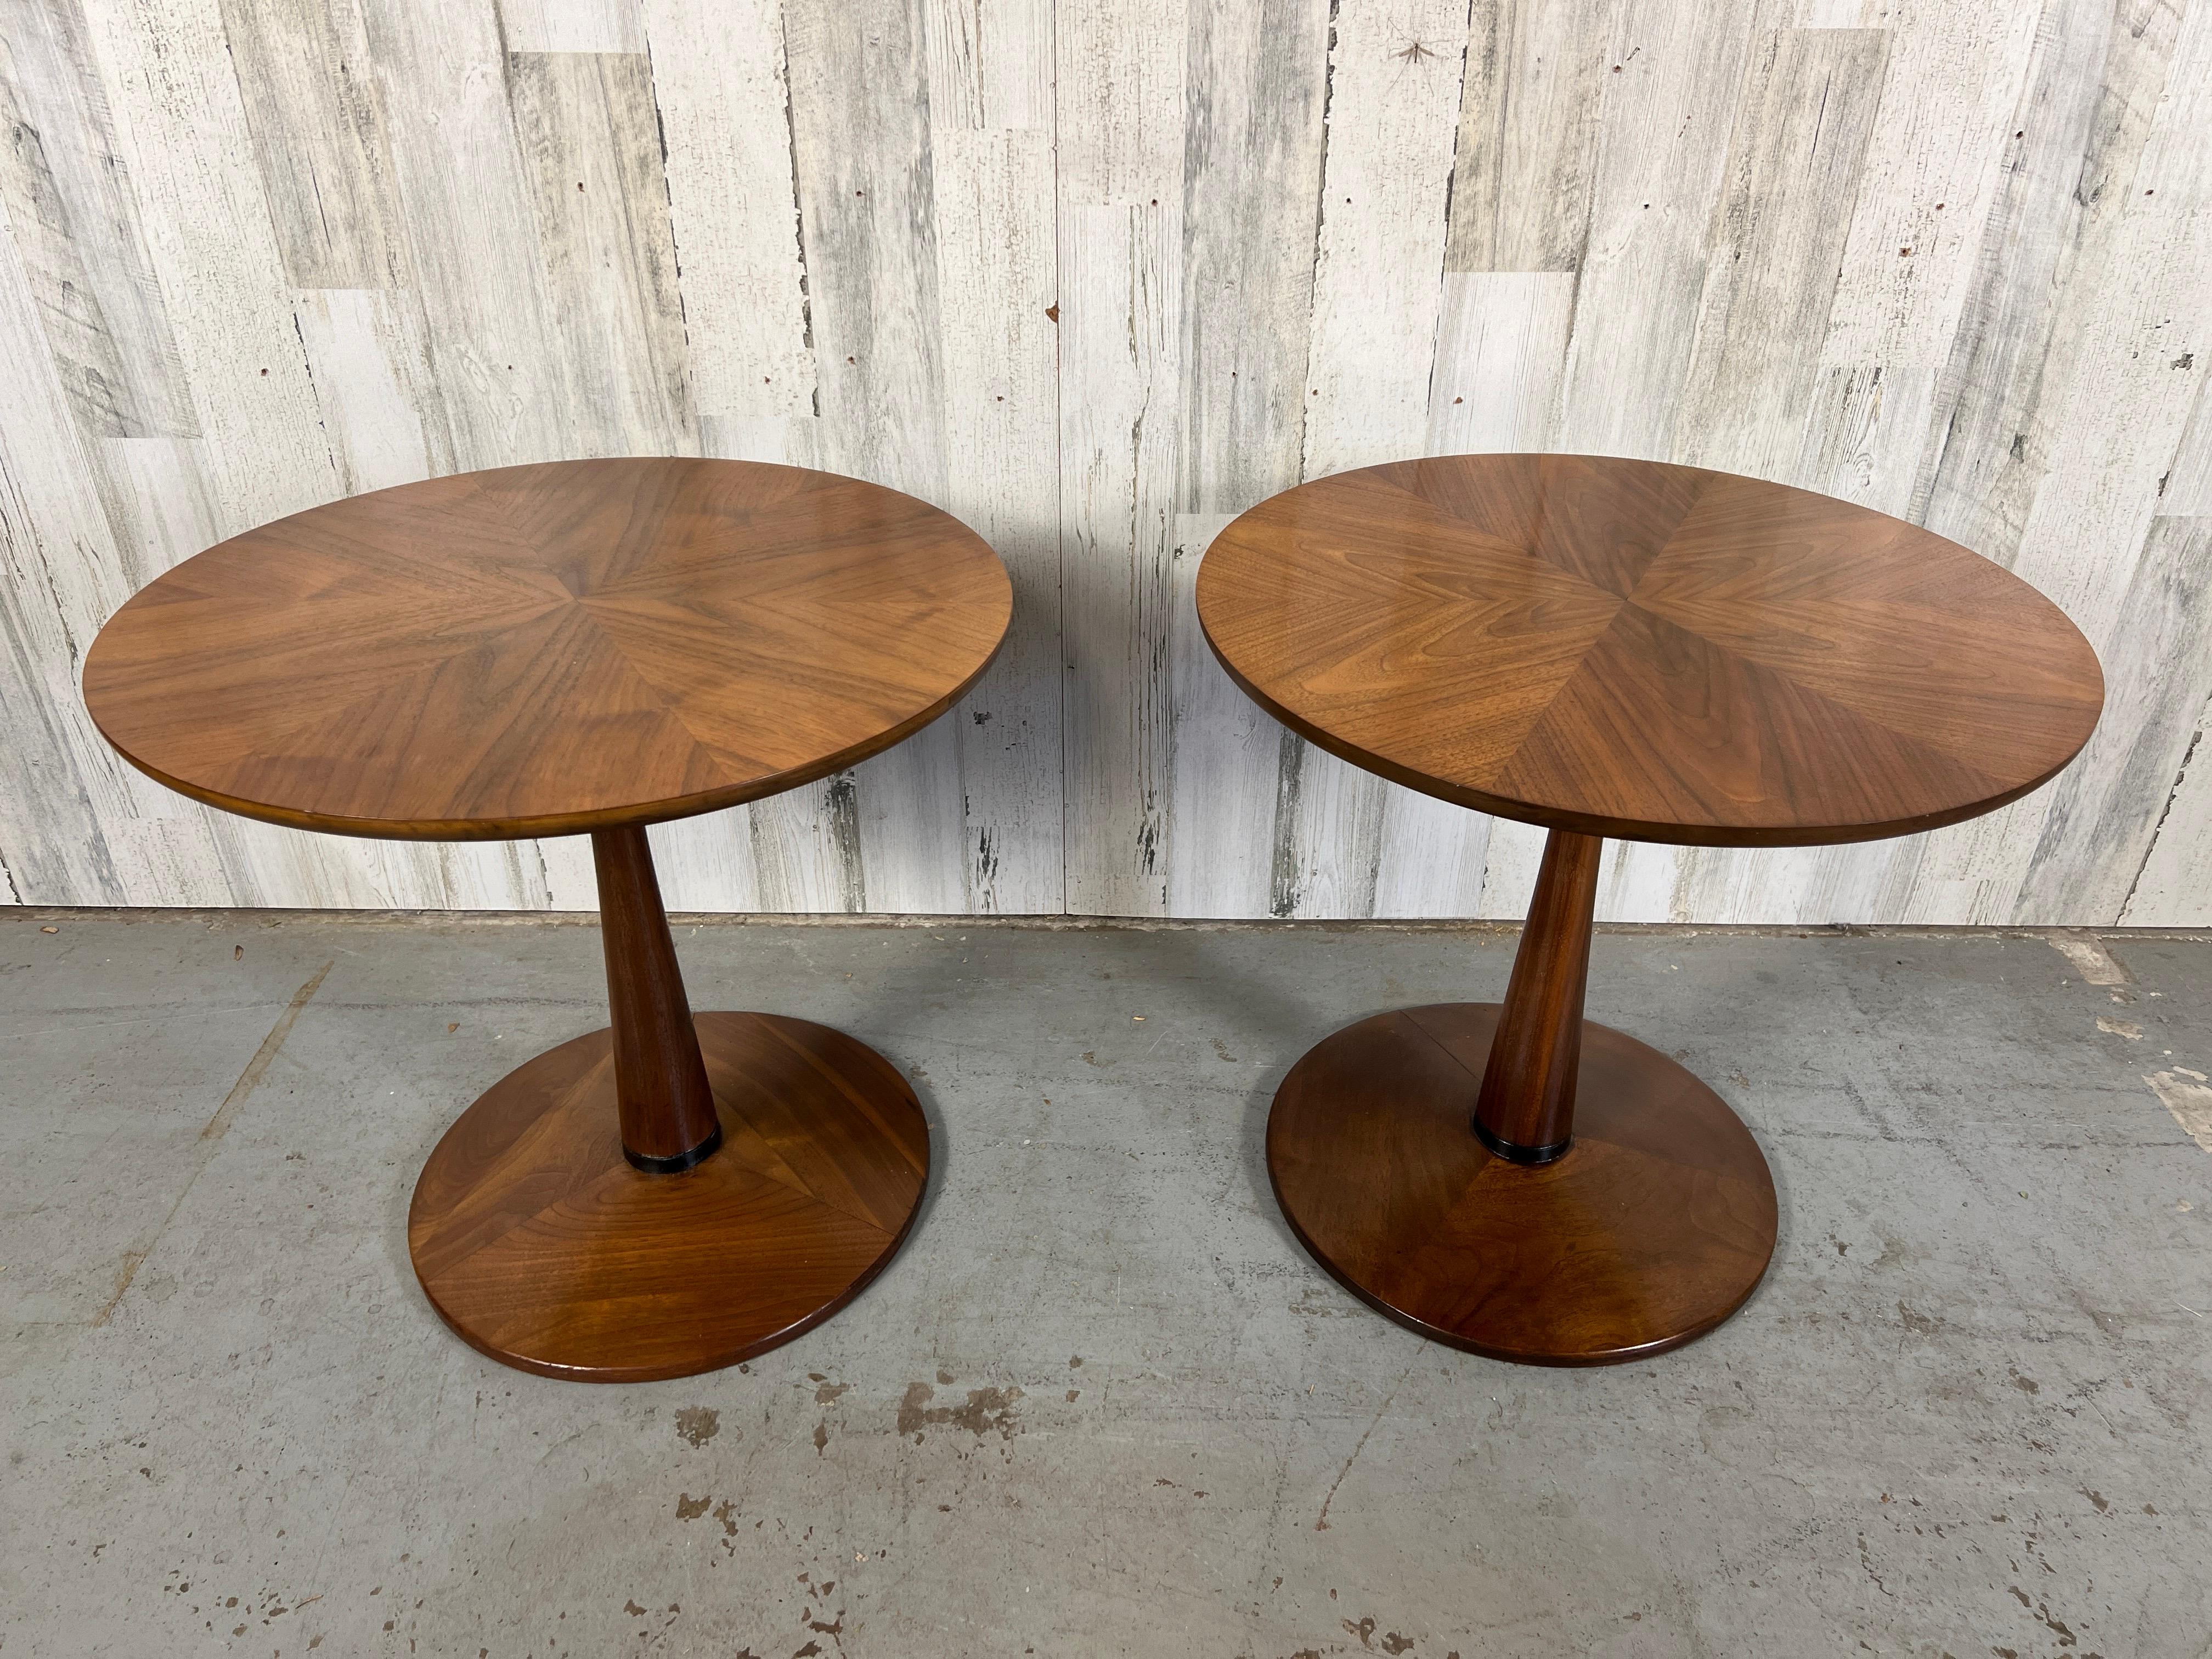 Hard to find a pair of these Drexel side tables .
Pie cut design veneer on the table tops with solid walnut bases.